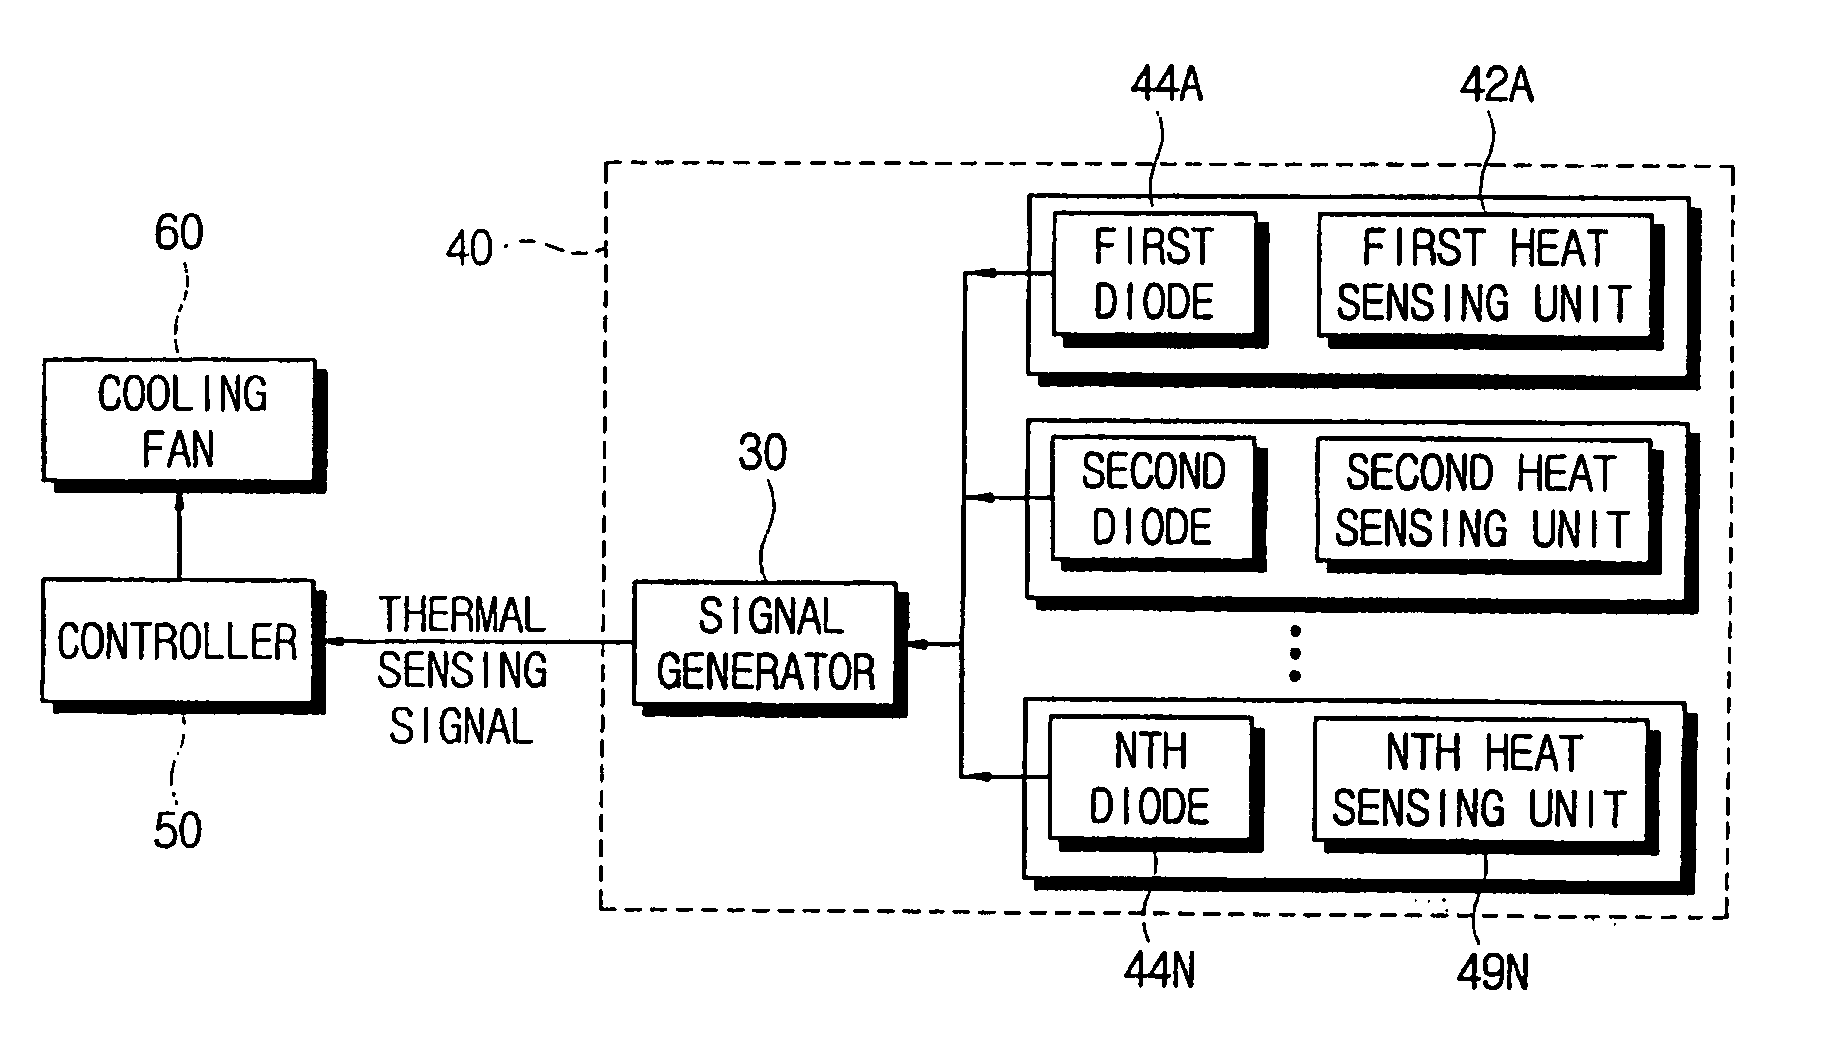 Thermal sensing apparatus and computer system incorporating the same